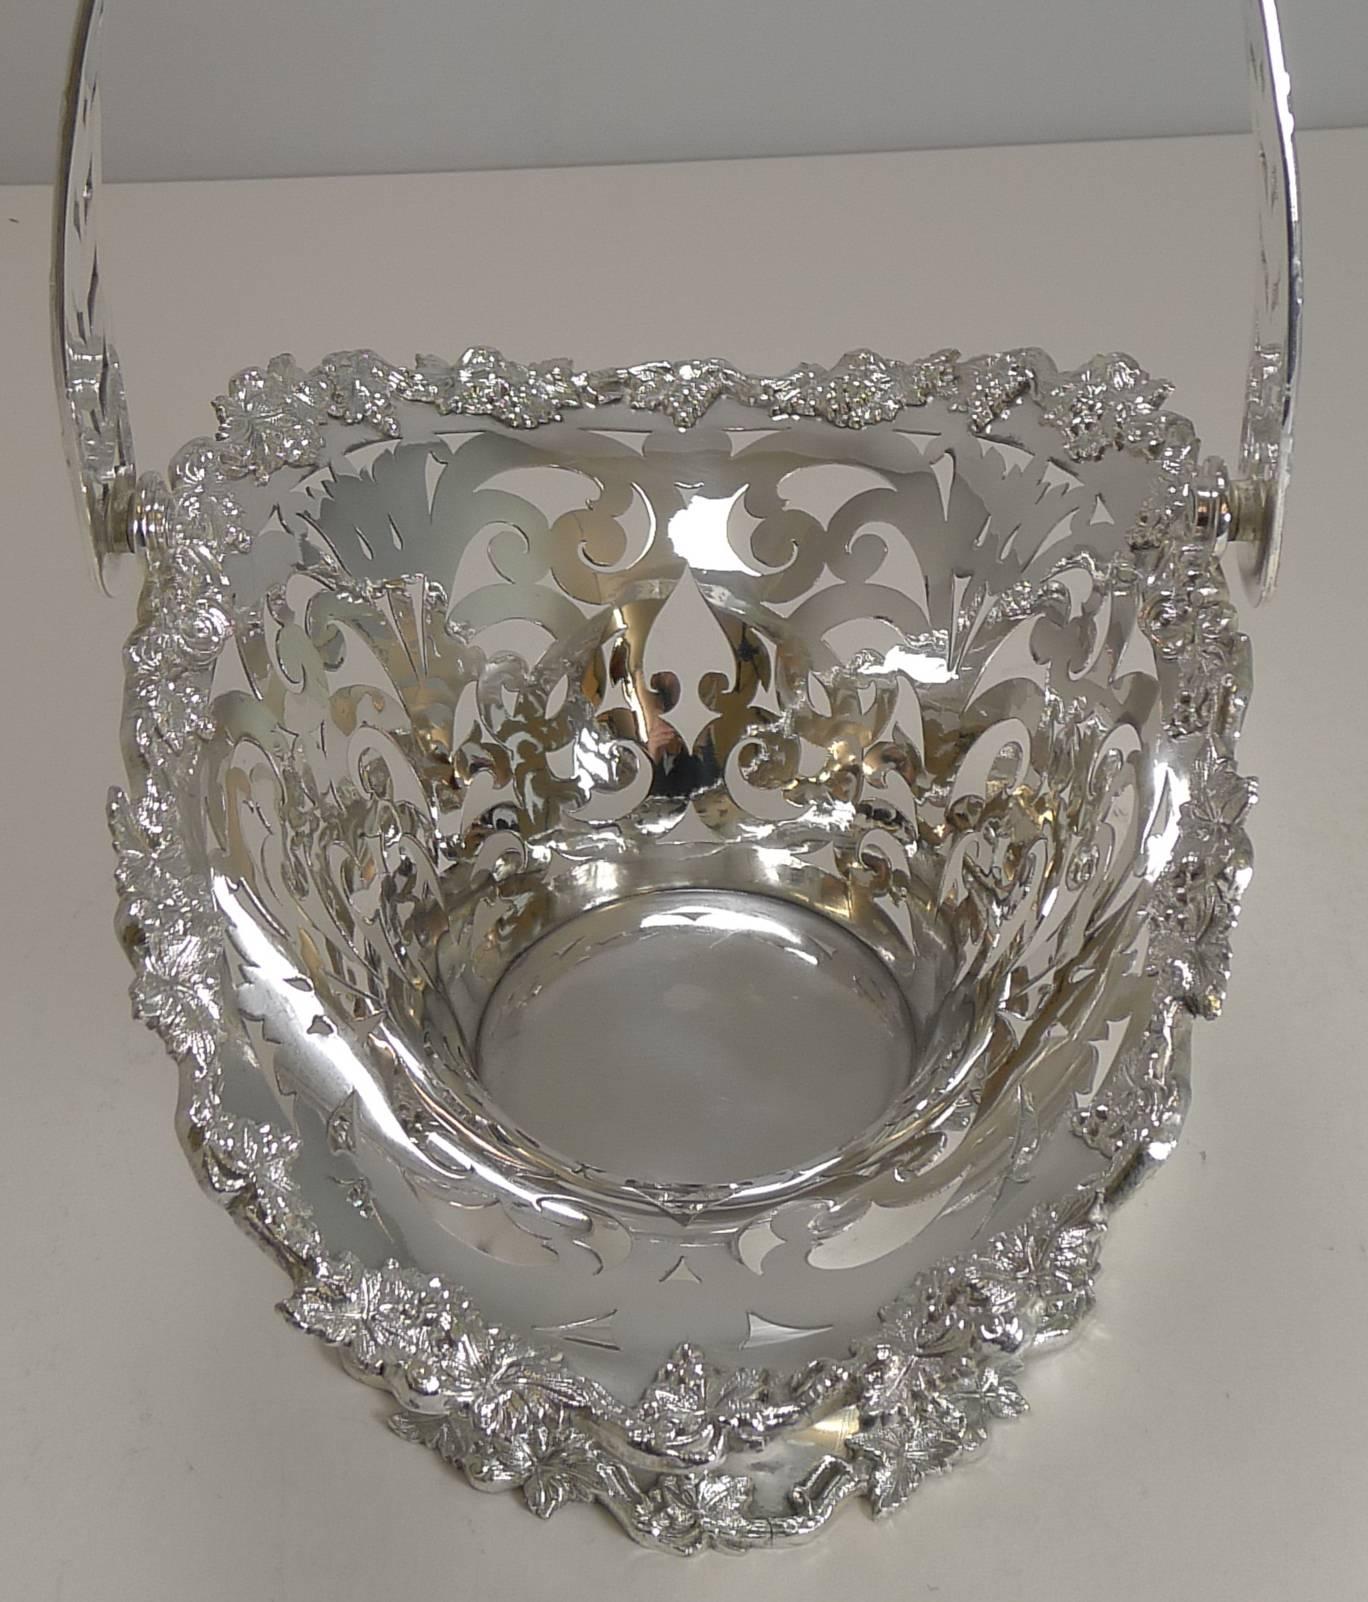 An absolutely stunning silver plated basket, dating to circa 1900; perfect for fruit, cakes or simply to enjoy it's beauty.

The basket is beautifully reticulated or pierced; the rim and foot having a raised border featuring grapevines. The